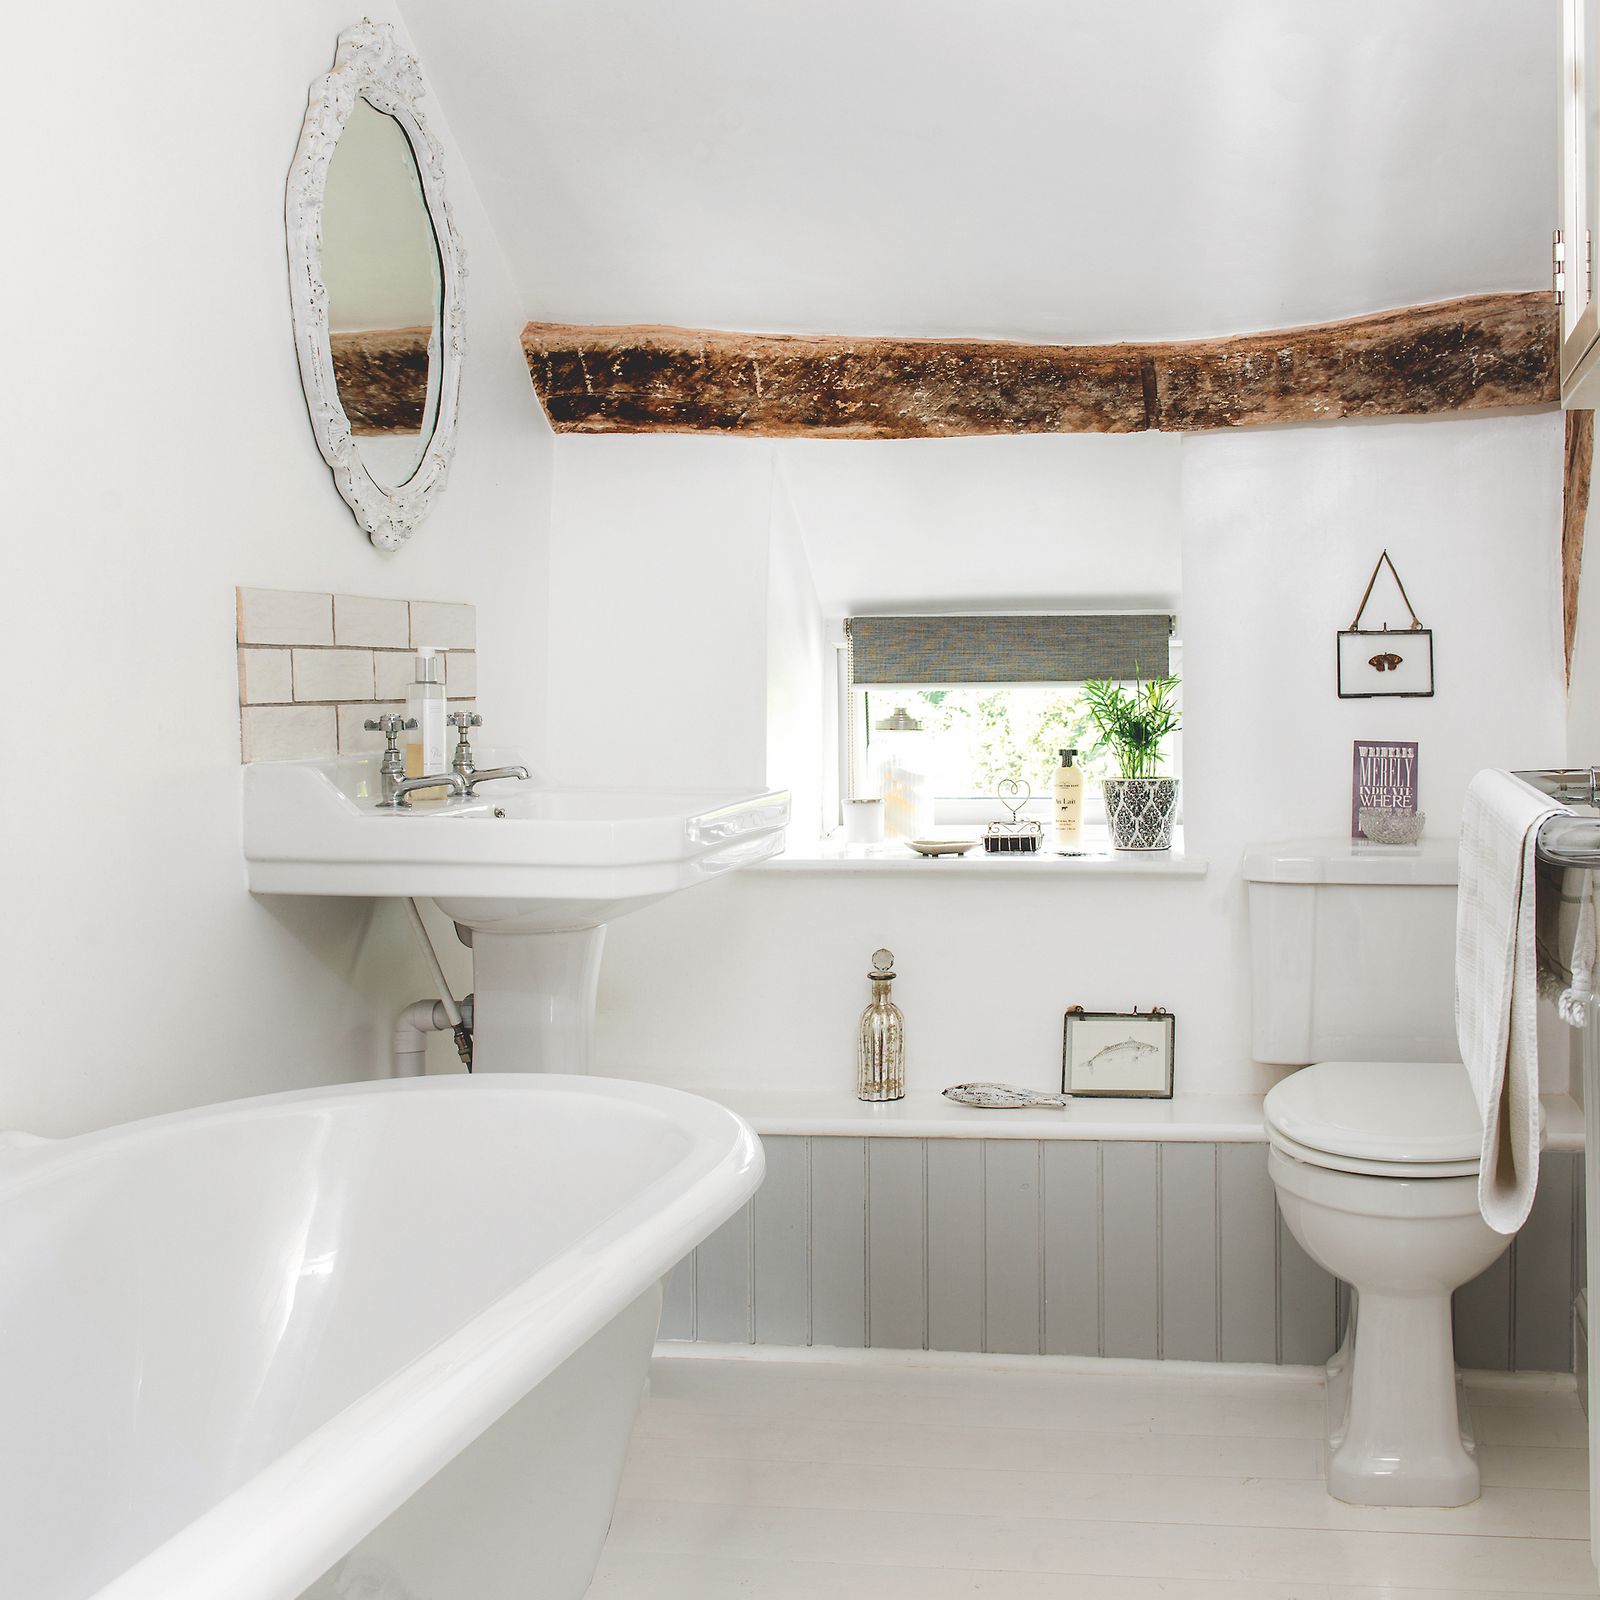 Step inside this charming 1700s thatched cottage full of understated ...